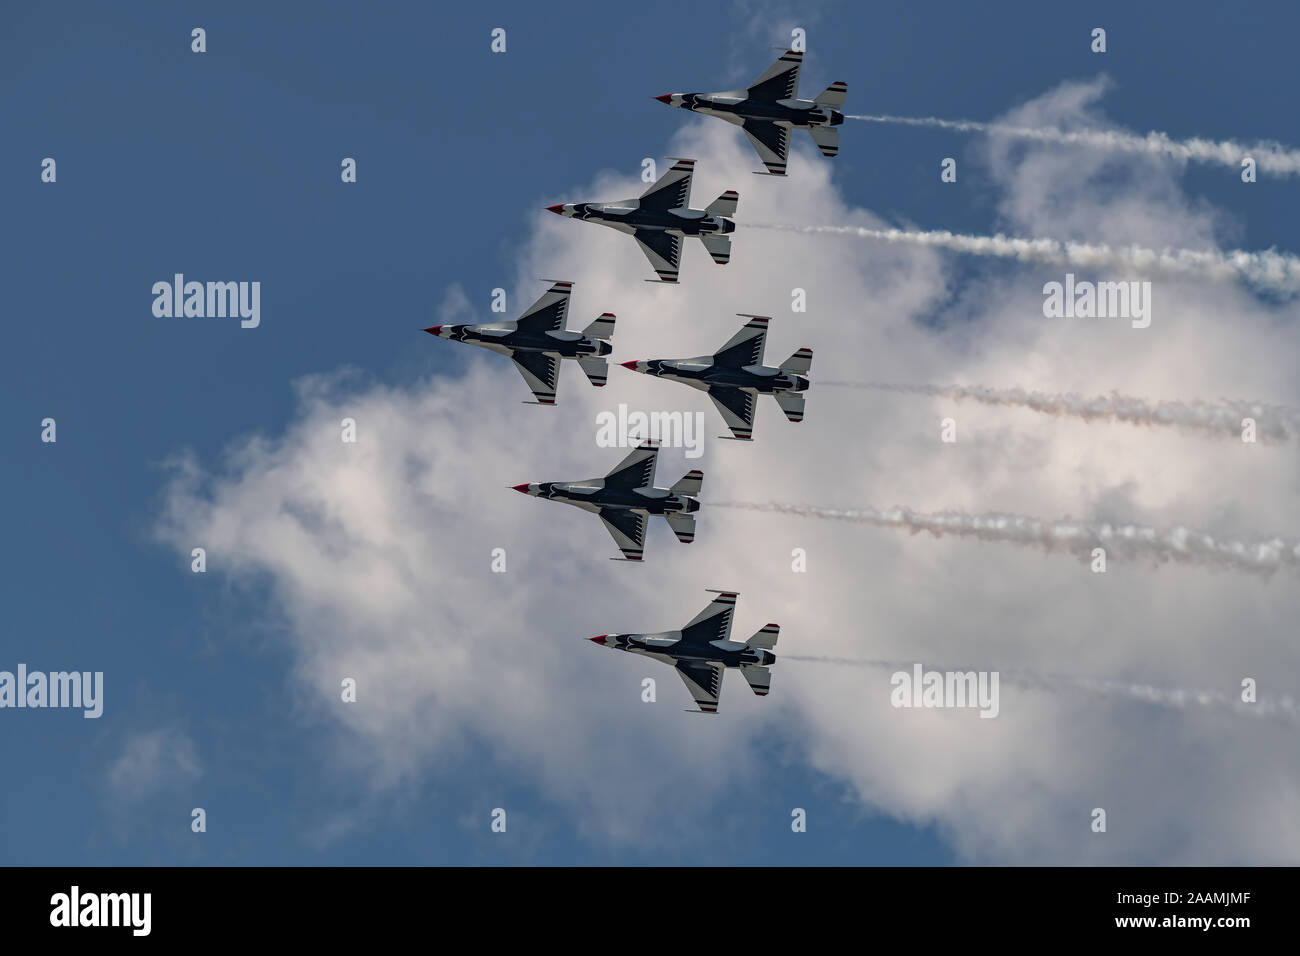 NEW WINDSOR NY - SEPTEMBER 15 2018: USAF Thunderbirds perform at the Stewart International Airport during the New York Airshow. Squadron is the offici Stock Photo